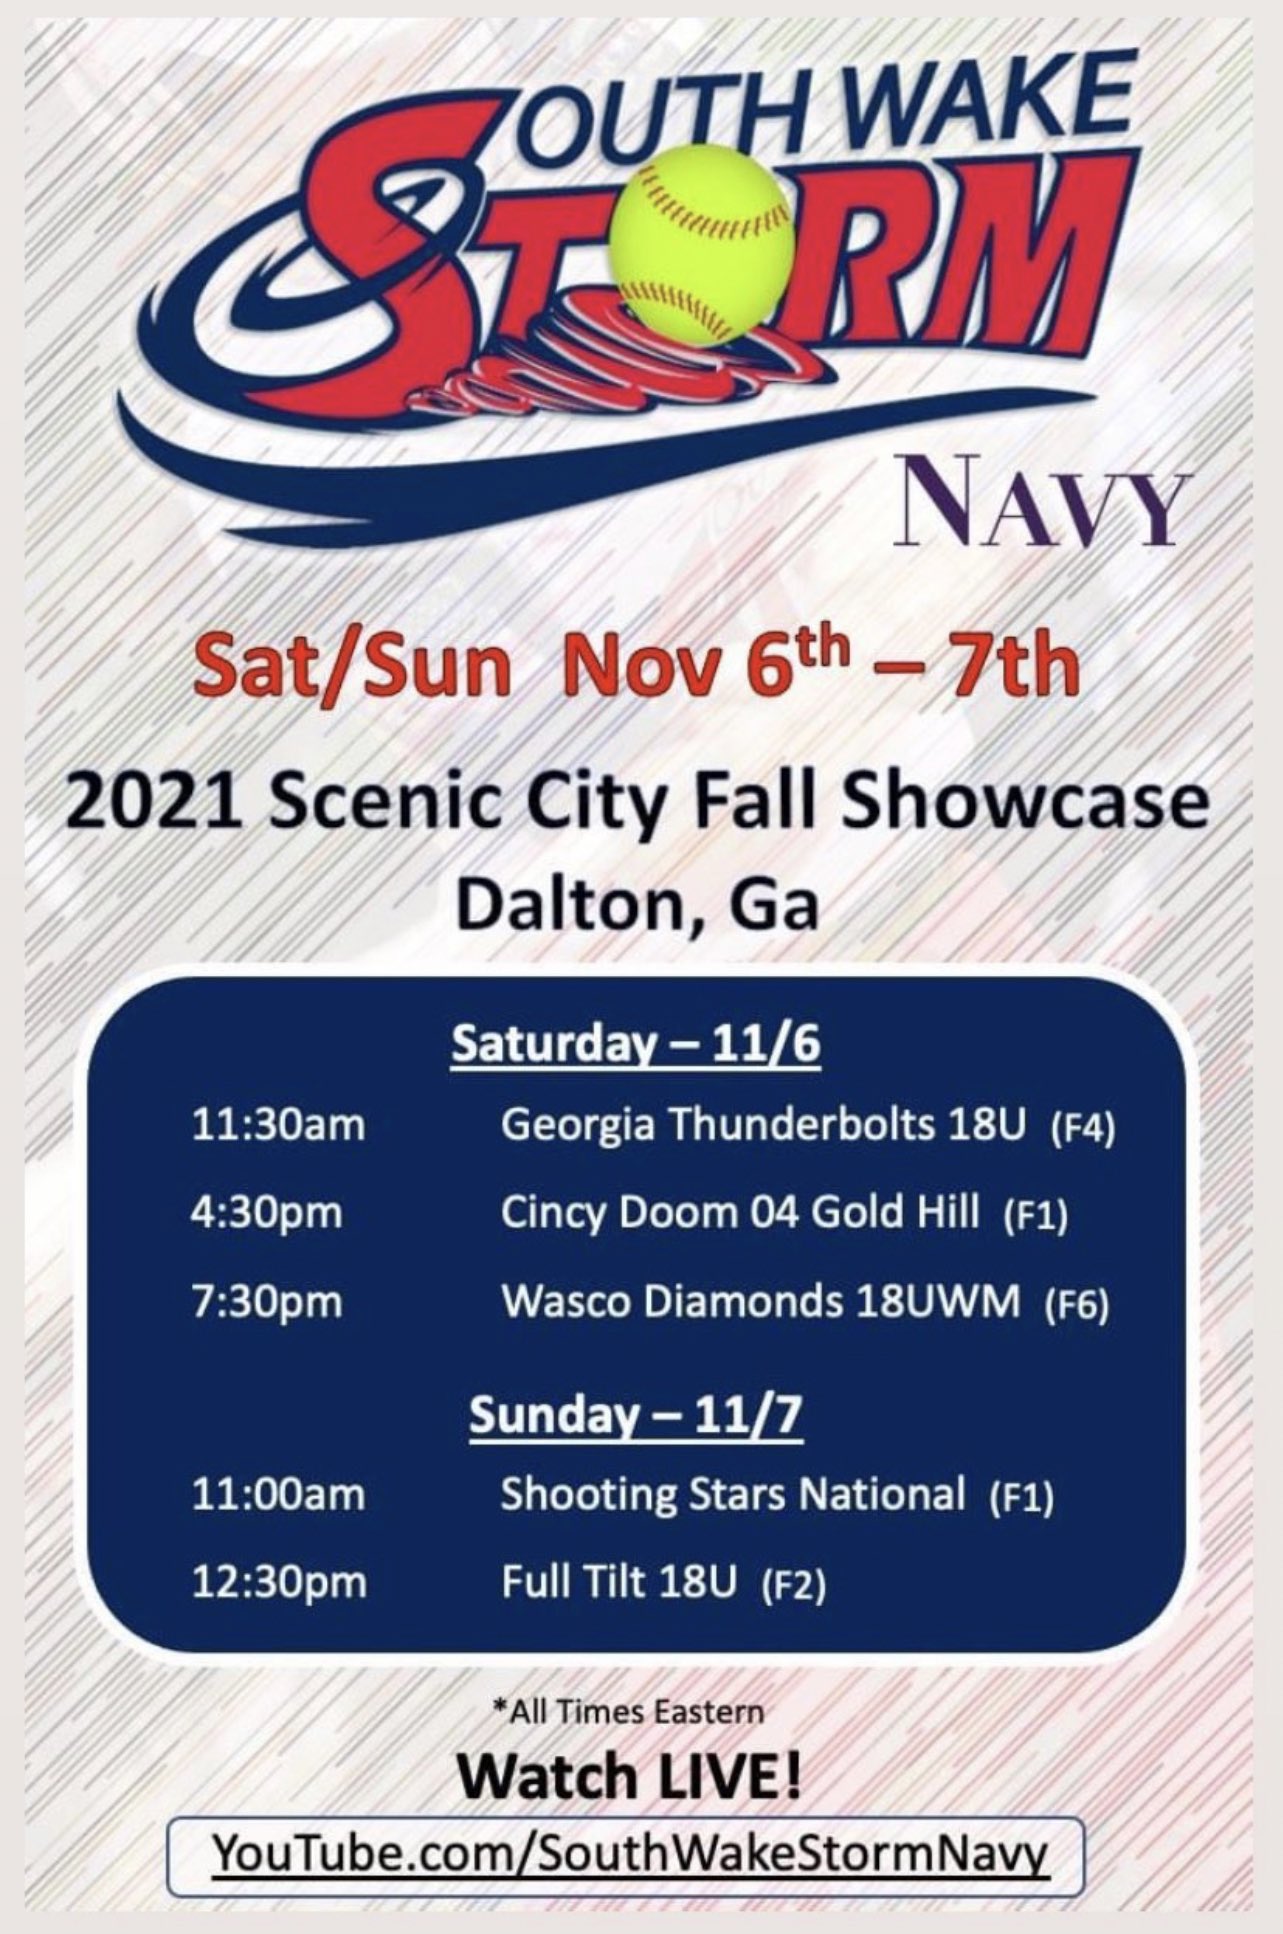 Mike on Twitter "SCENIC CITY FALL SHOWCASE! Come see SWSNavy at JACK